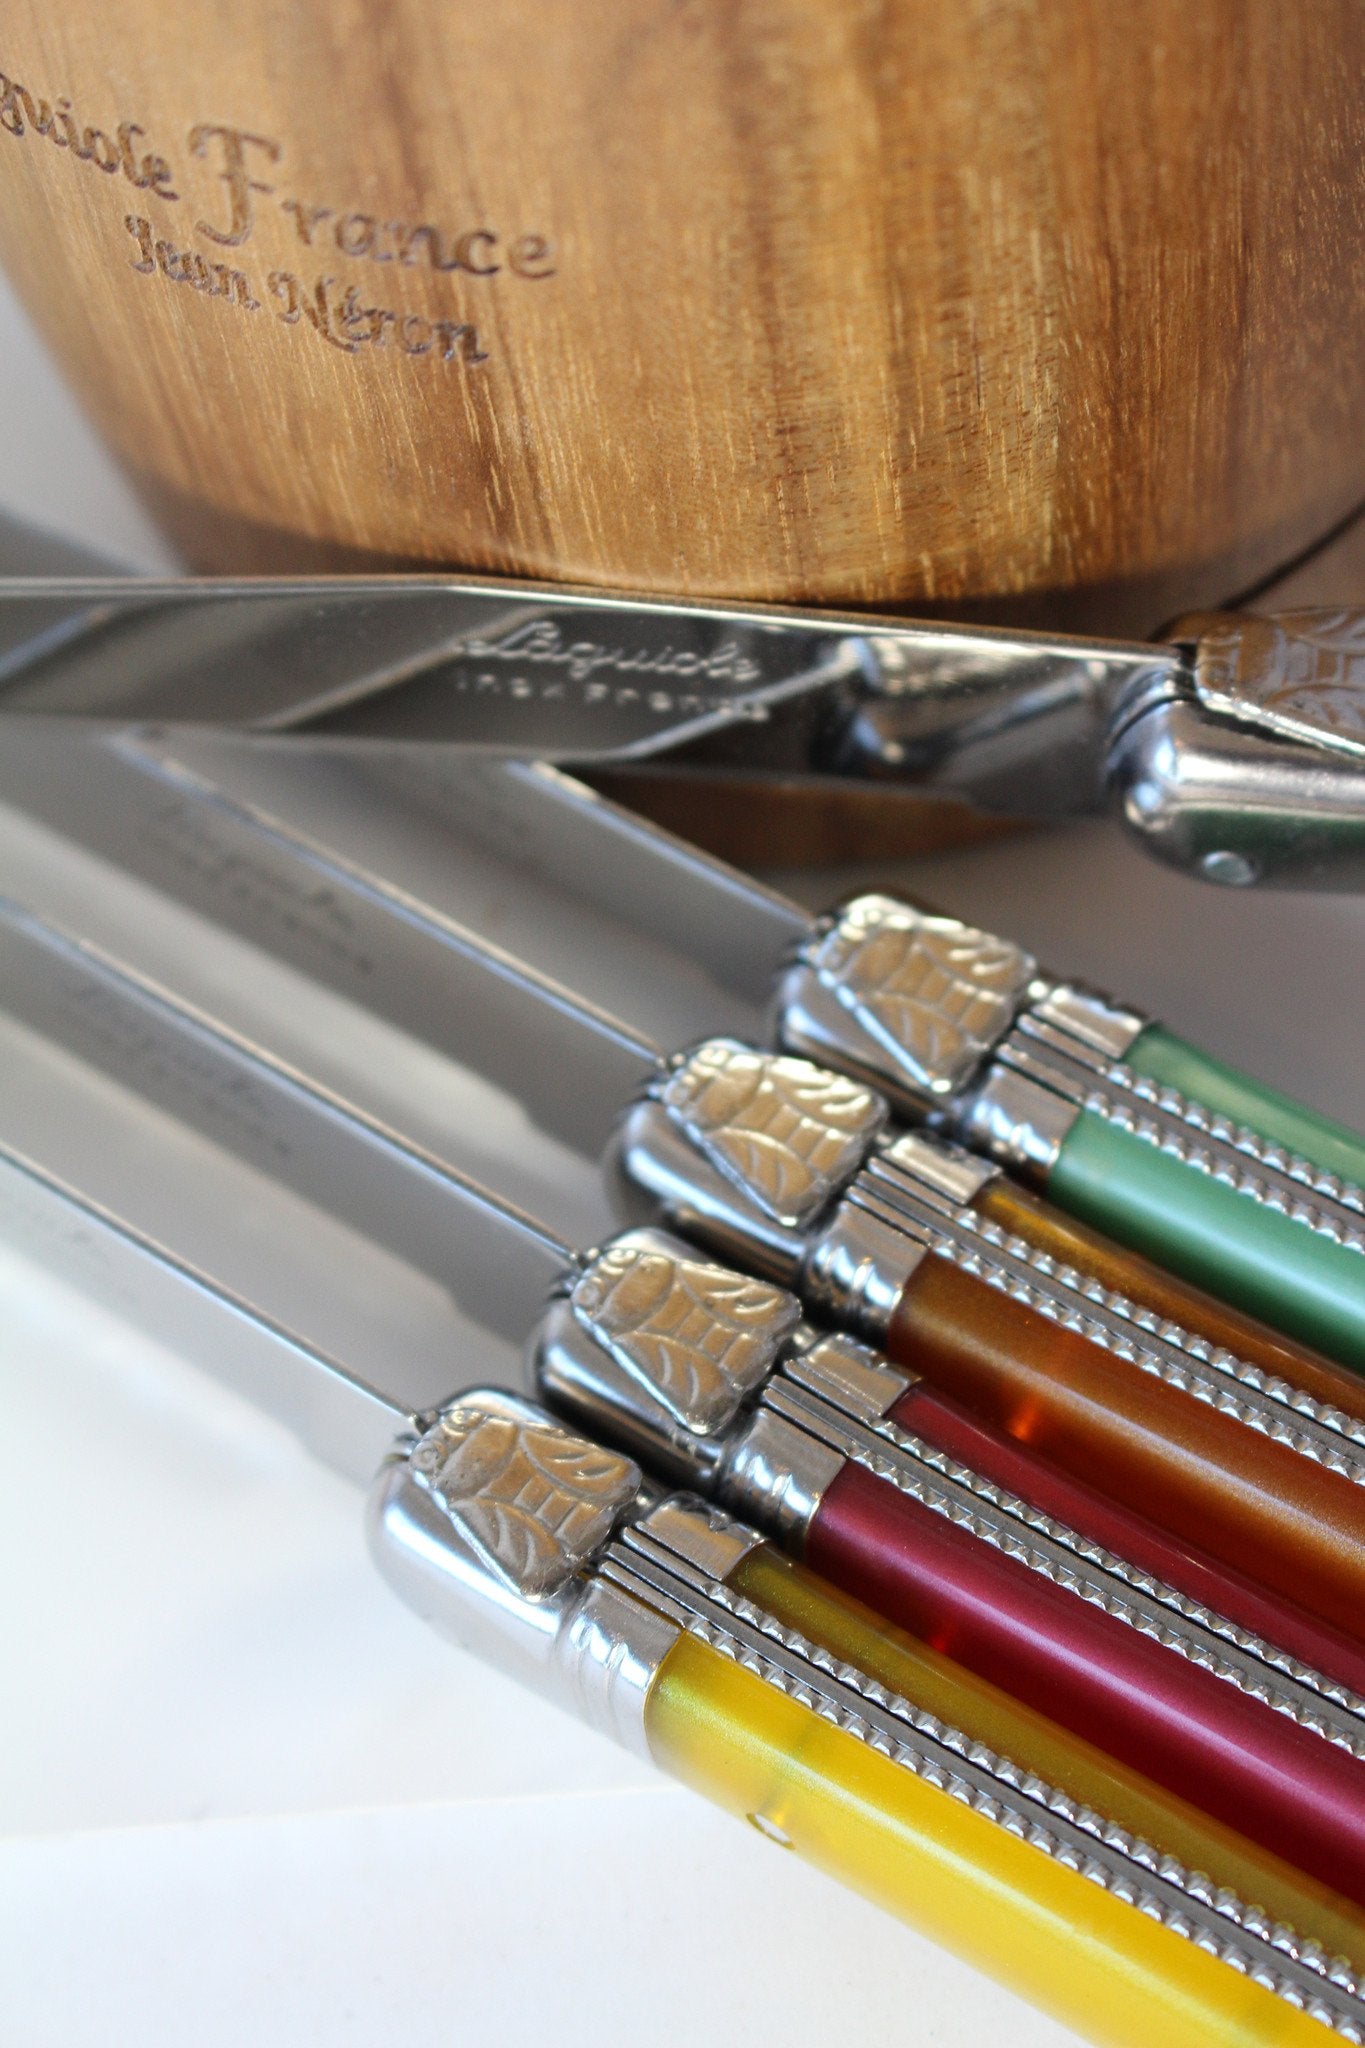 Laguiole Rainbow Platine Knives in Wooden Box with Acrylic Lid (Set of 6) Cutlery Laguiole Brand_Laguiole Flatware Sets Kitchen_Dinnerware Kitchen_Kitchenware Laguiole laguiole_rainbow_platine_knives_572285fb-2c75-46a2-86b9-e19dbd4ba4c5